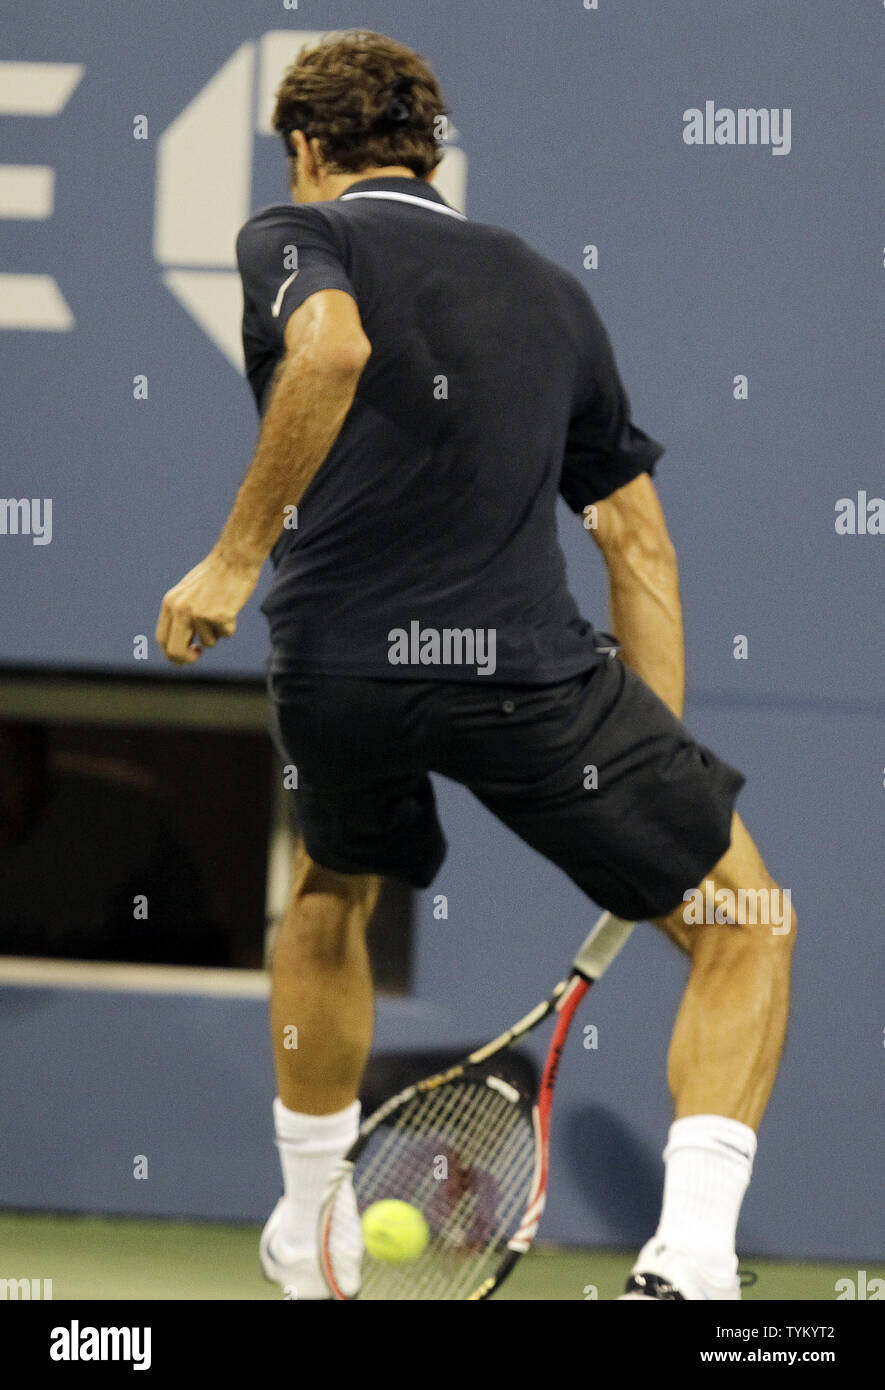 Roger Federer of the USA hits a ball between his legs and wins the point in  the second set against Brian Dabul of Argentina in the first round of the  U.S. Open